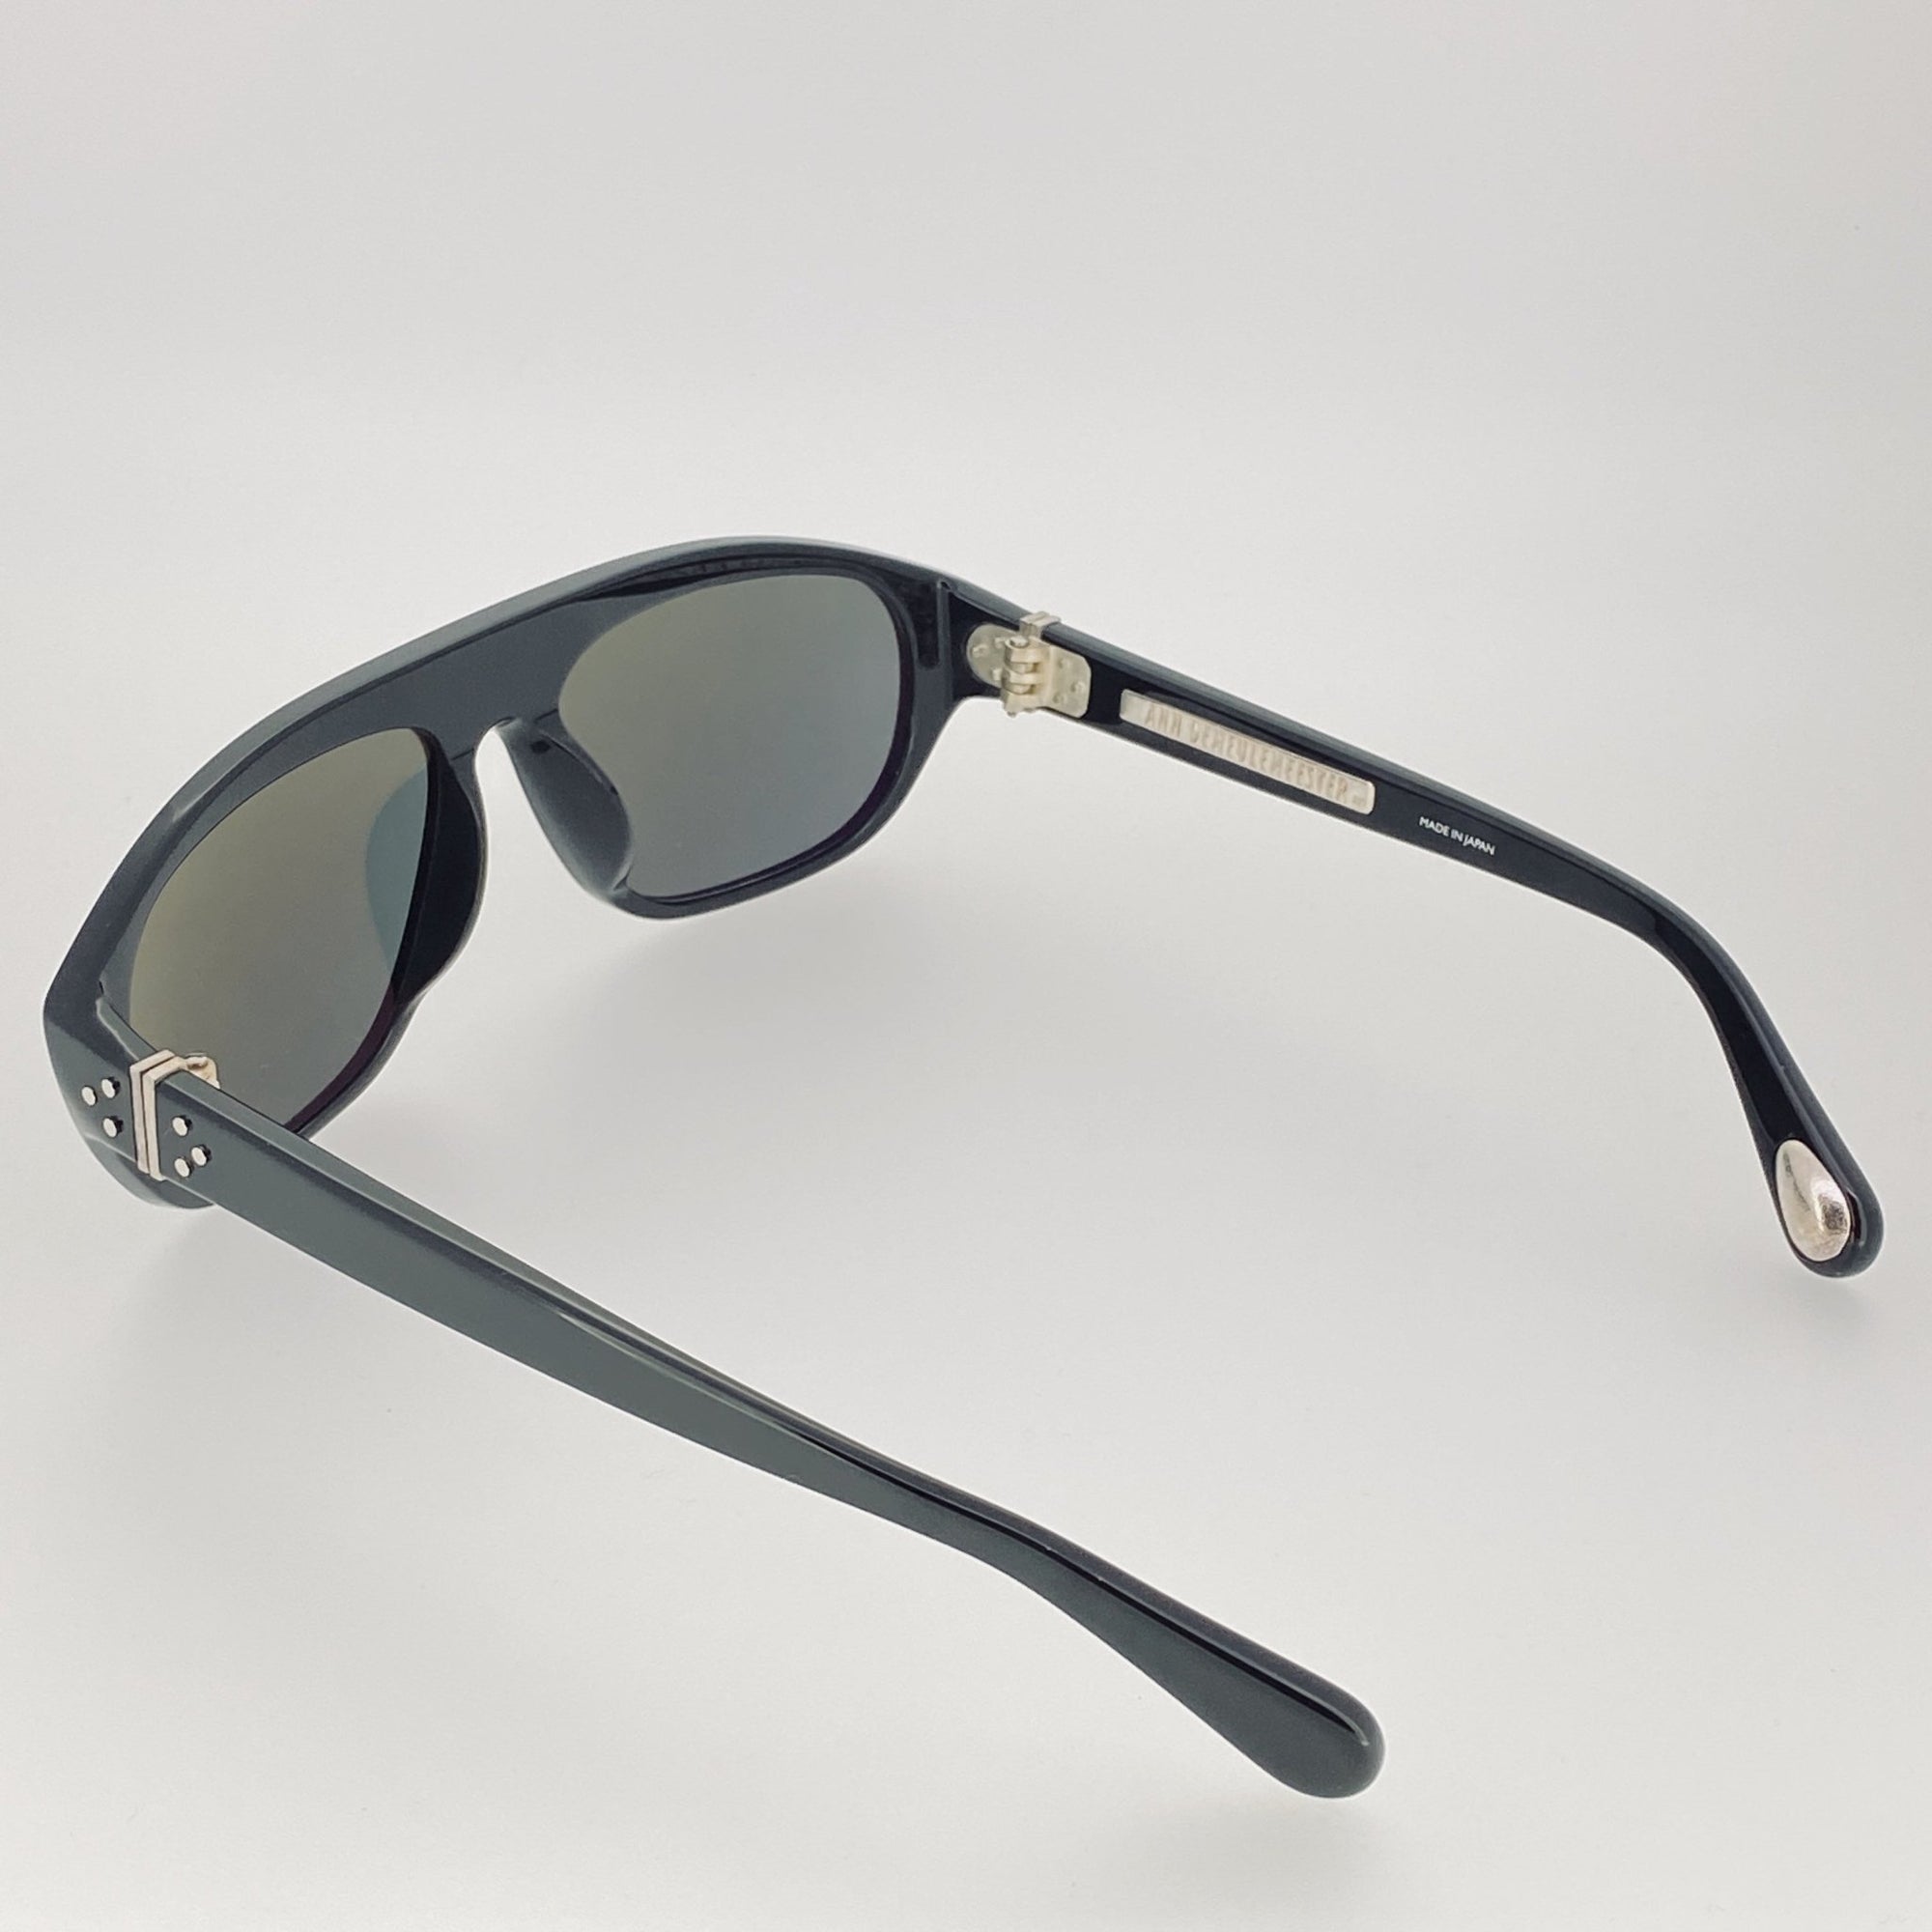 Ann Demeulemeester Sunglasses Flat Top Black and Gray - Watches & Crystals